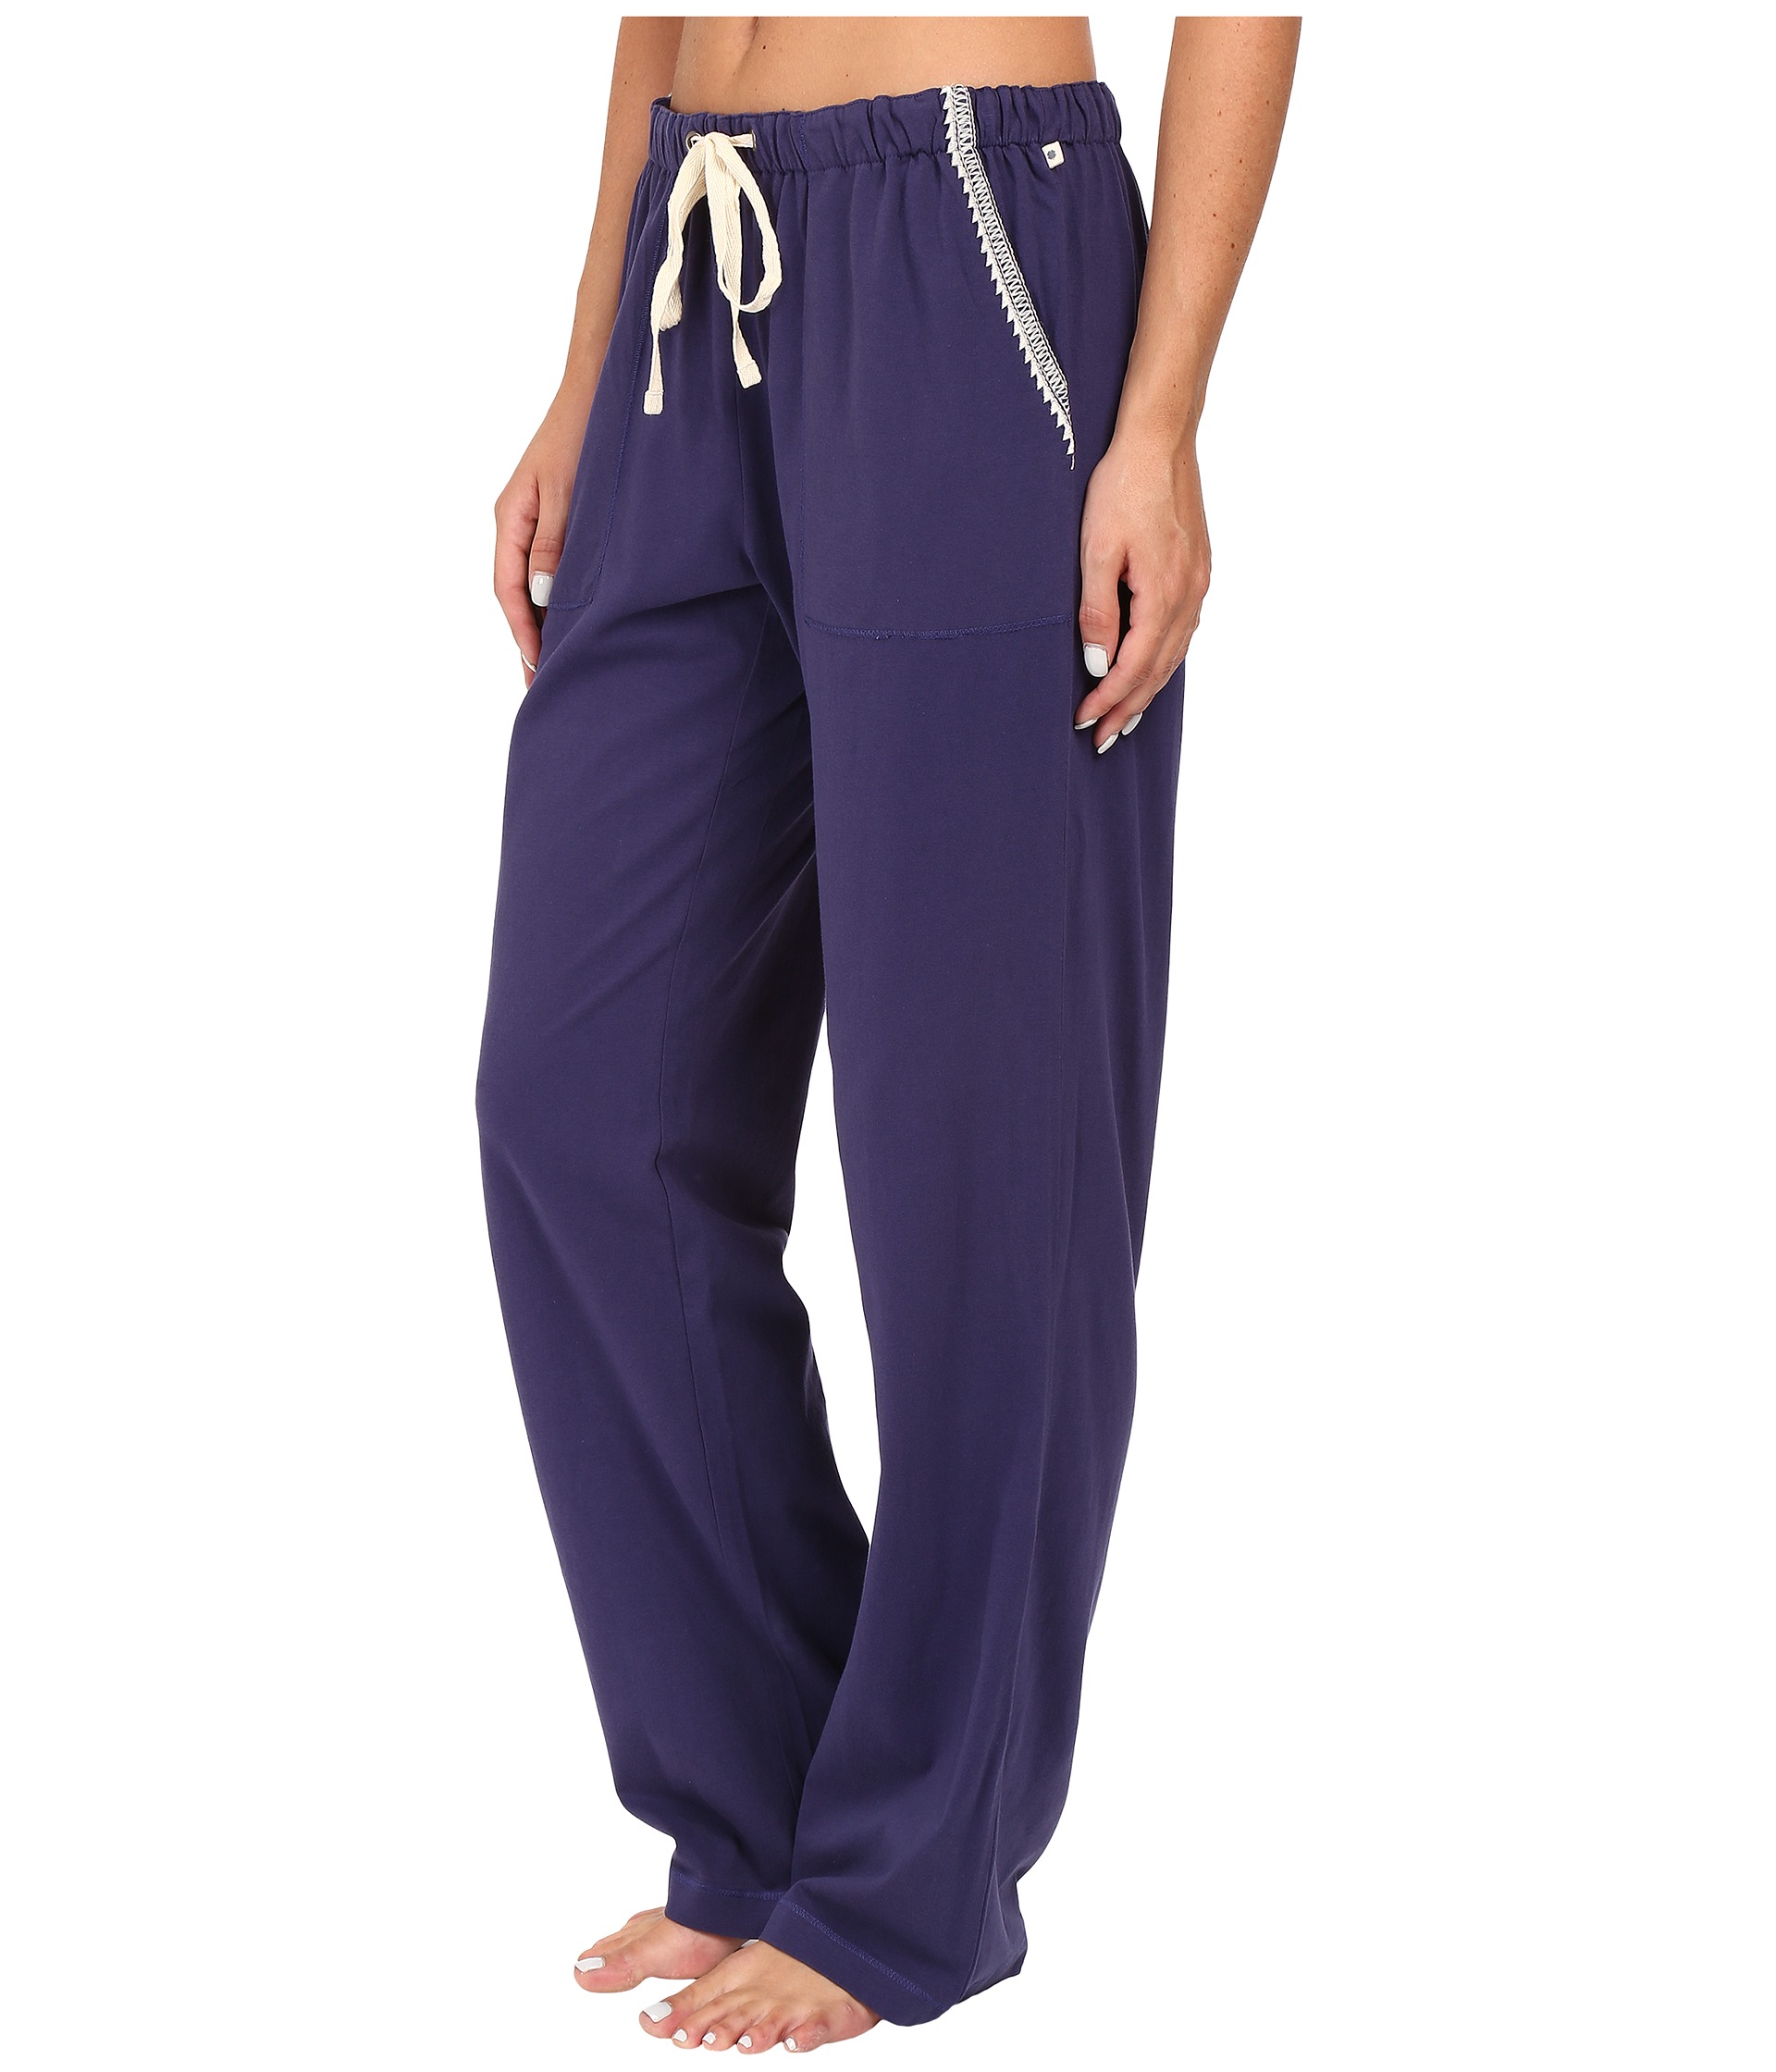 Lucky Brand Lounge Pants - Zappos.com Free Shipping BOTH Ways